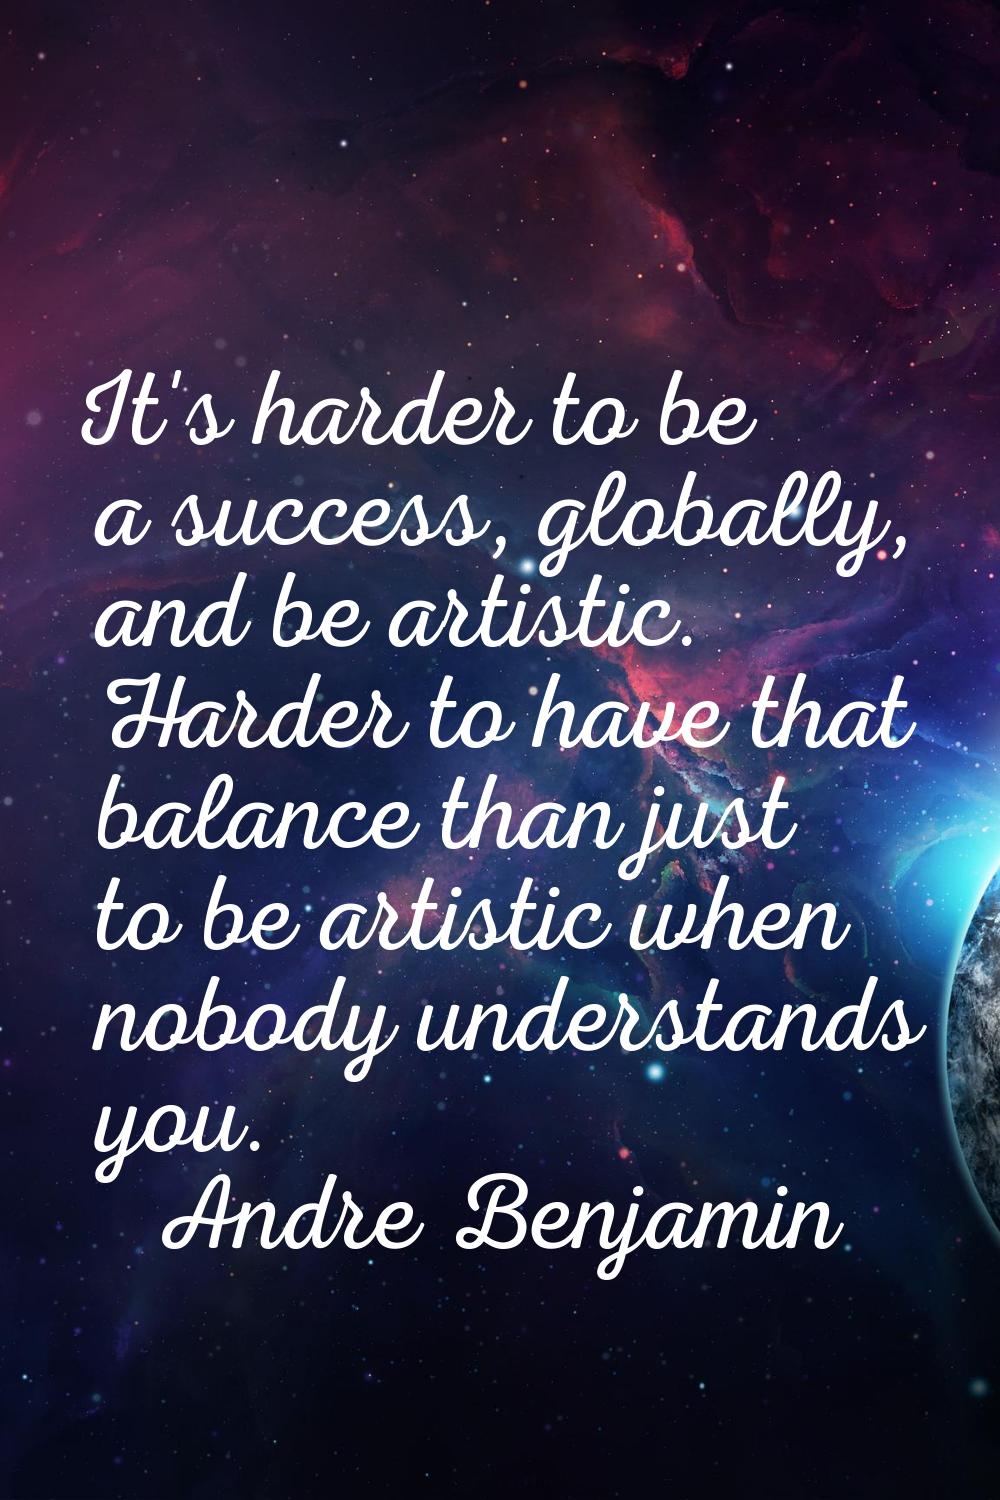 It's harder to be a success, globally, and be artistic. Harder to have that balance than just to be